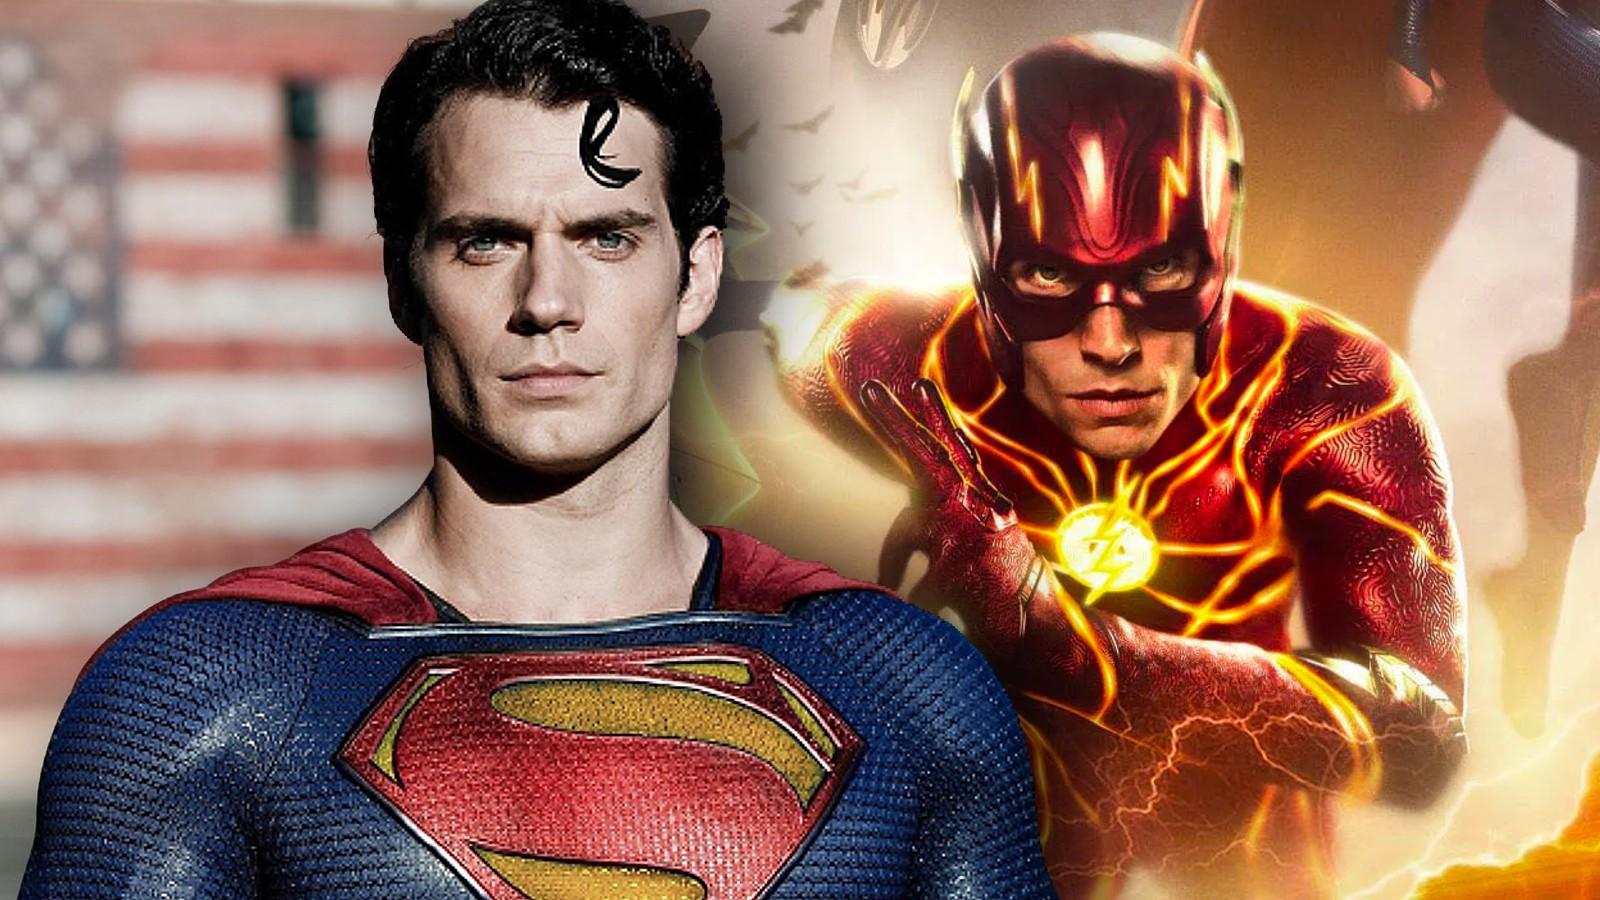 Henry Cavill as Superman and Ezra Miller in The Flash